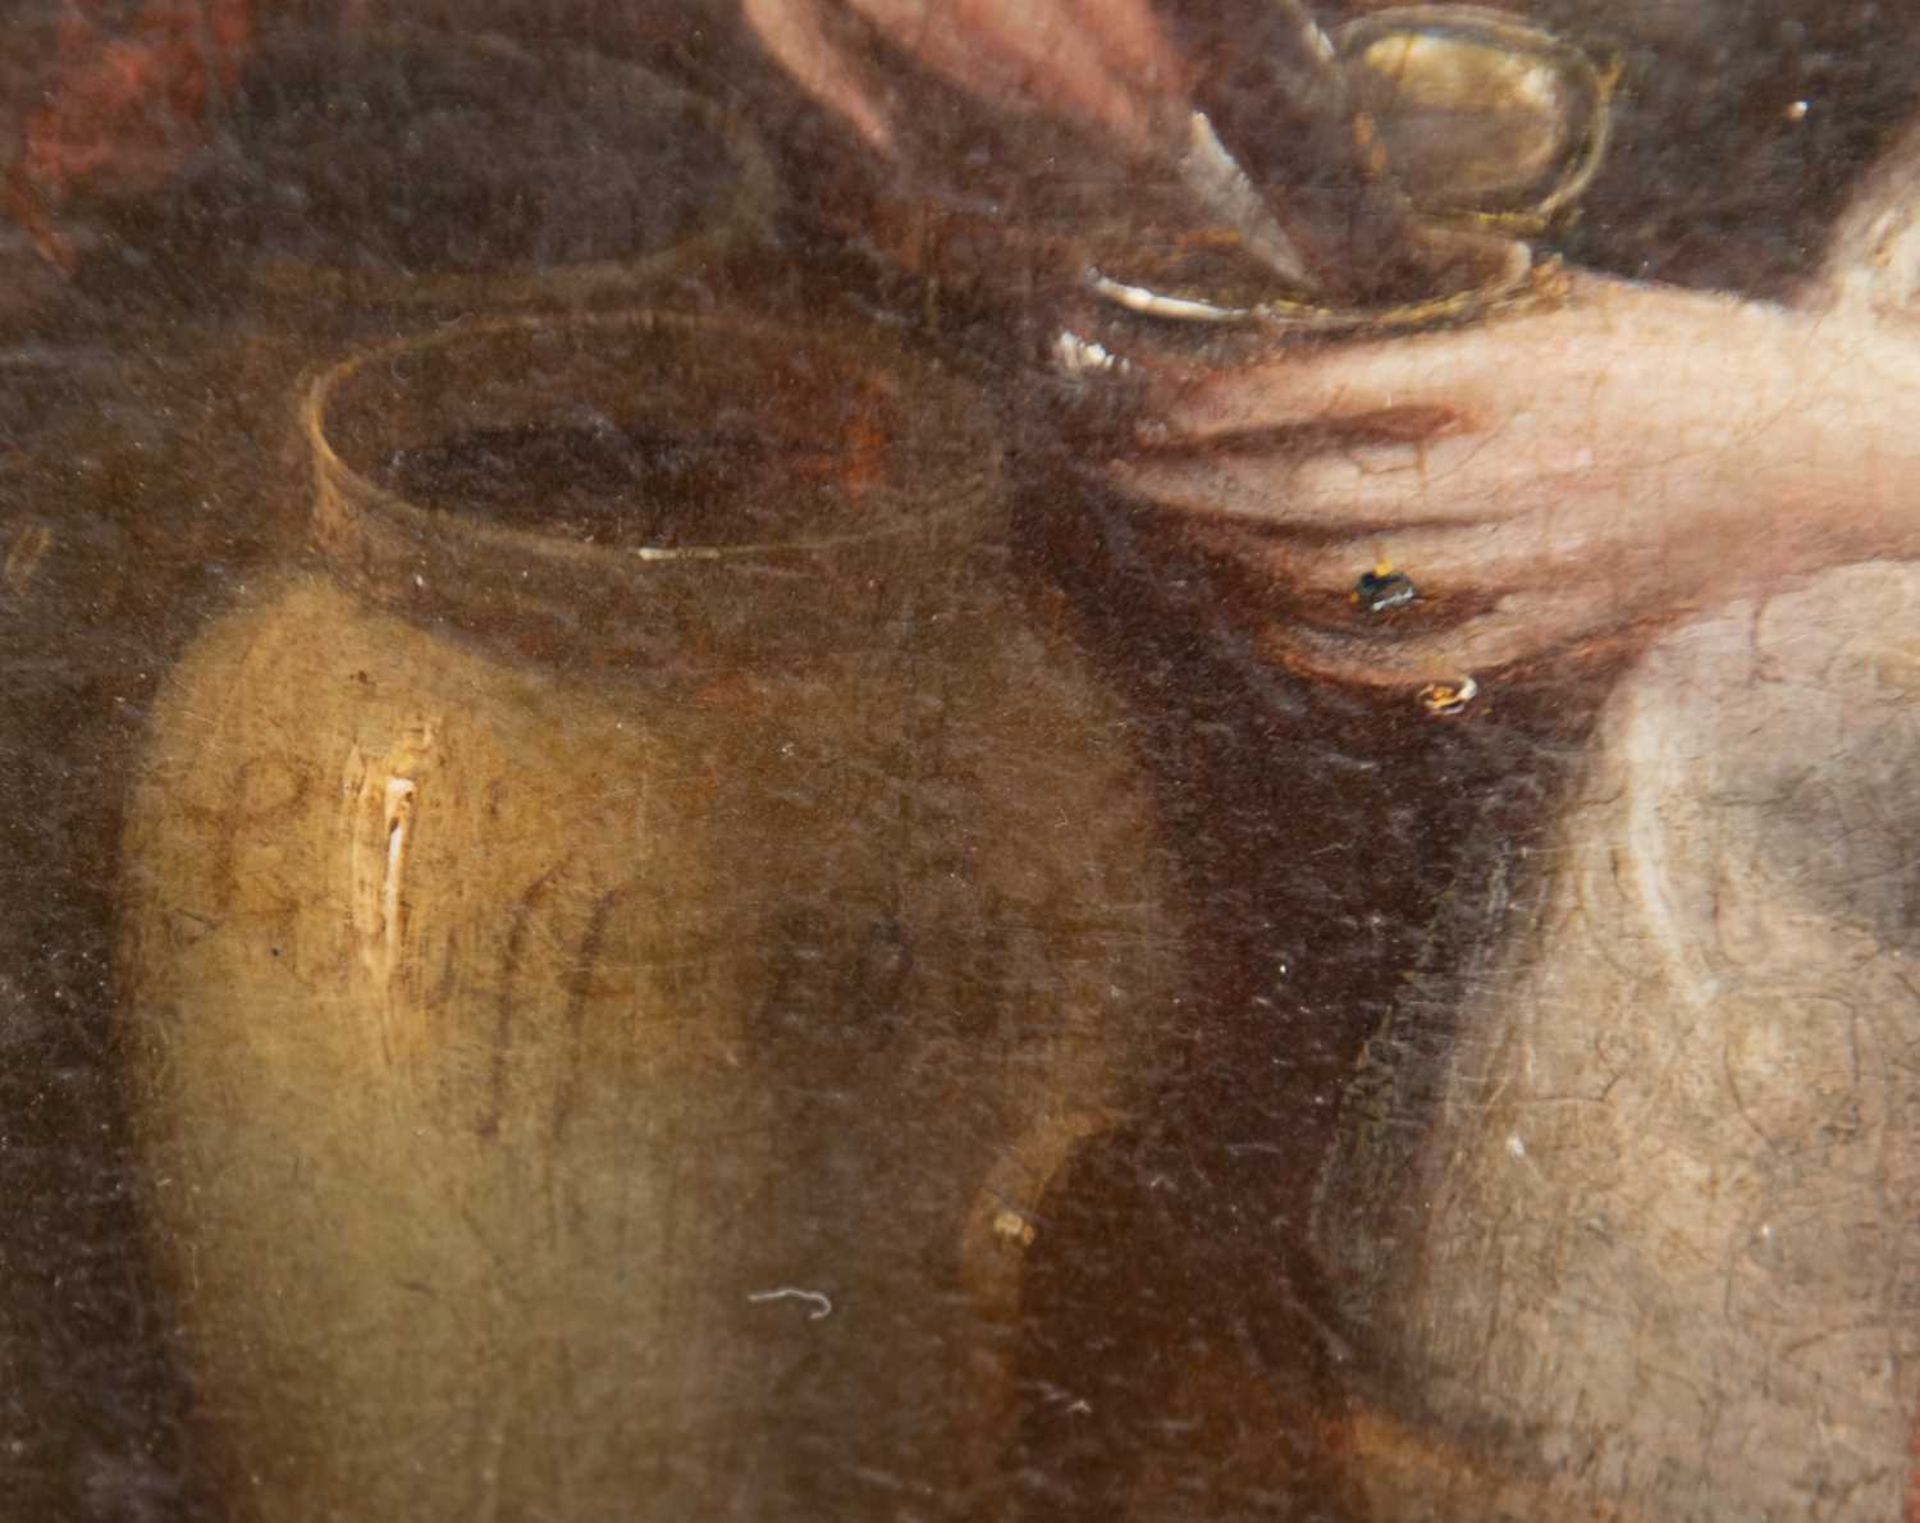 ENGLISH SCHOOL (19TH CENTURY) PORTRAIT OF A LADY MIXING MEDICINES - Image 3 of 4